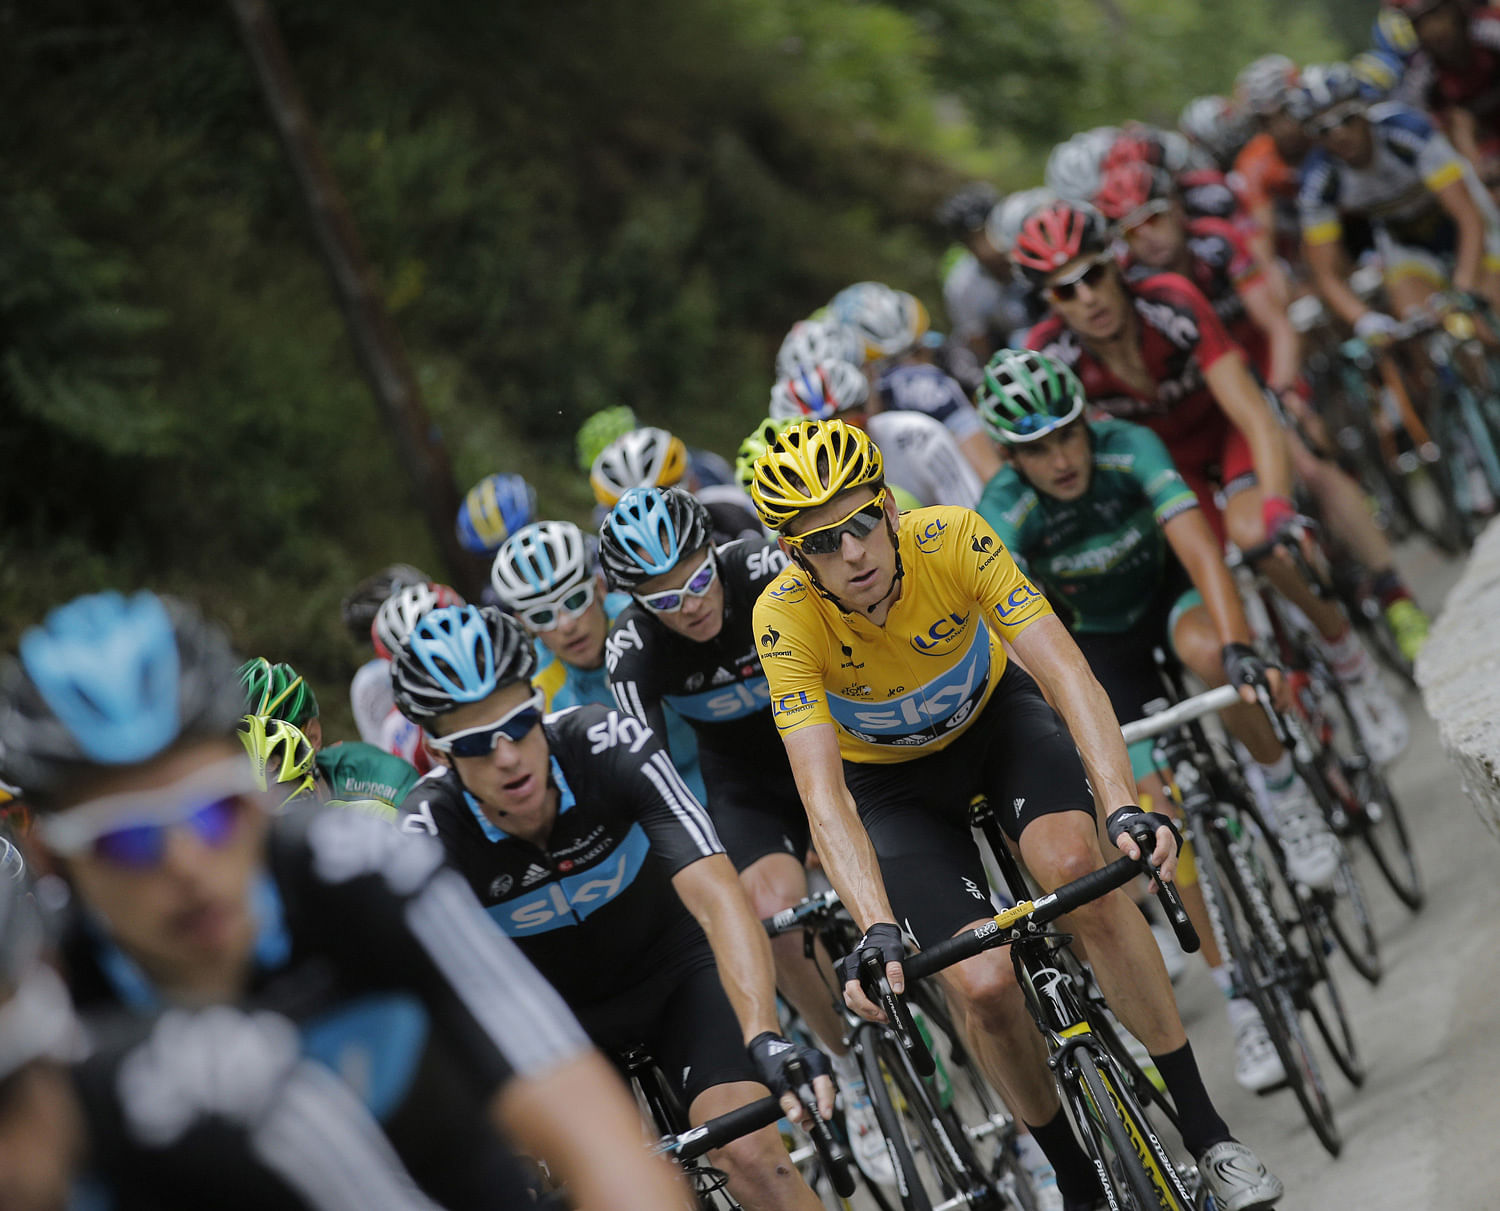 Bradley Wiggins of Britain, wearing the overall leader's yellow jersey, rides in the pack during the 14th stage of the Tour de France cycling race over 191 kilometers (118.7 miles) with start in Limoux and finish in Foix, France, Sunday July 15, 2012...